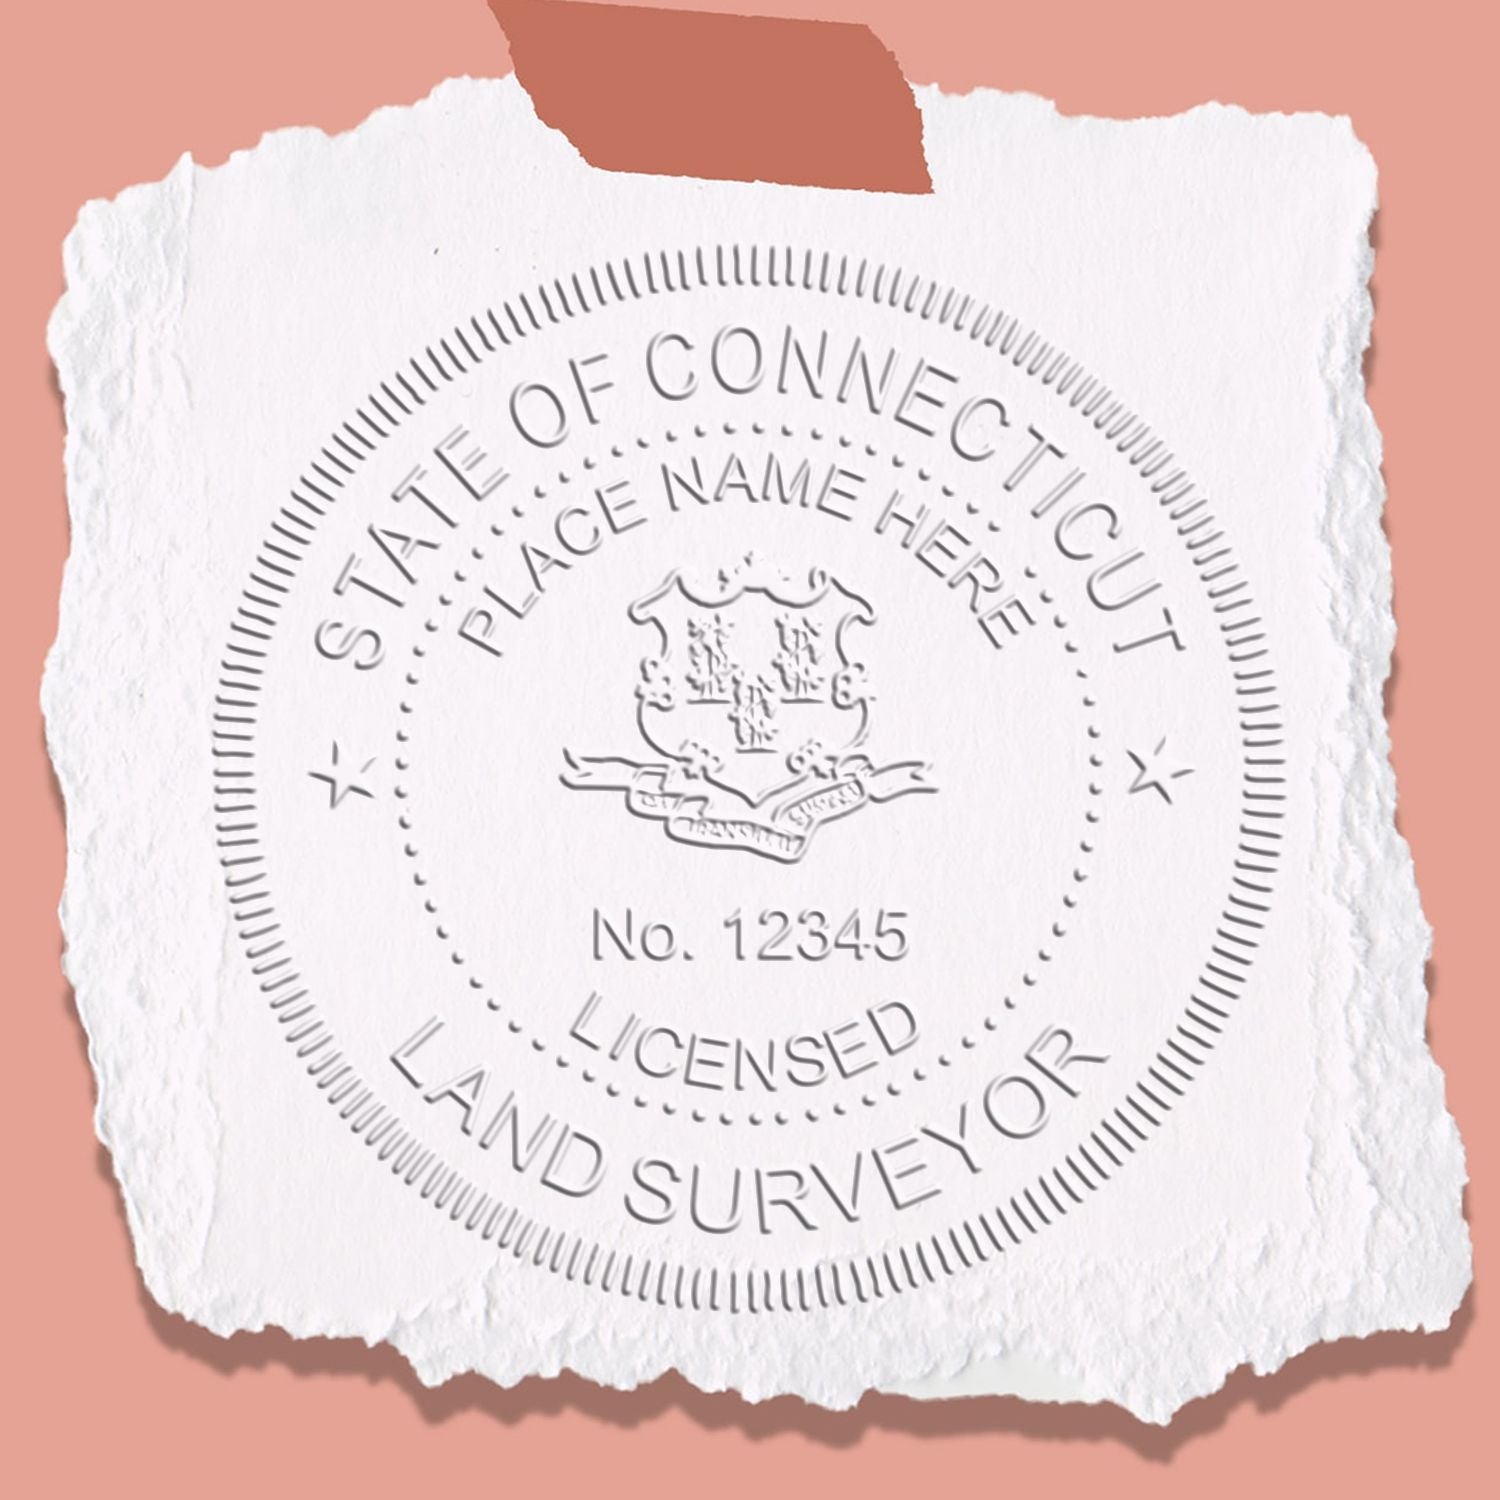 The main image for the Handheld Connecticut Land Surveyor Seal depicting a sample of the imprint and electronic files